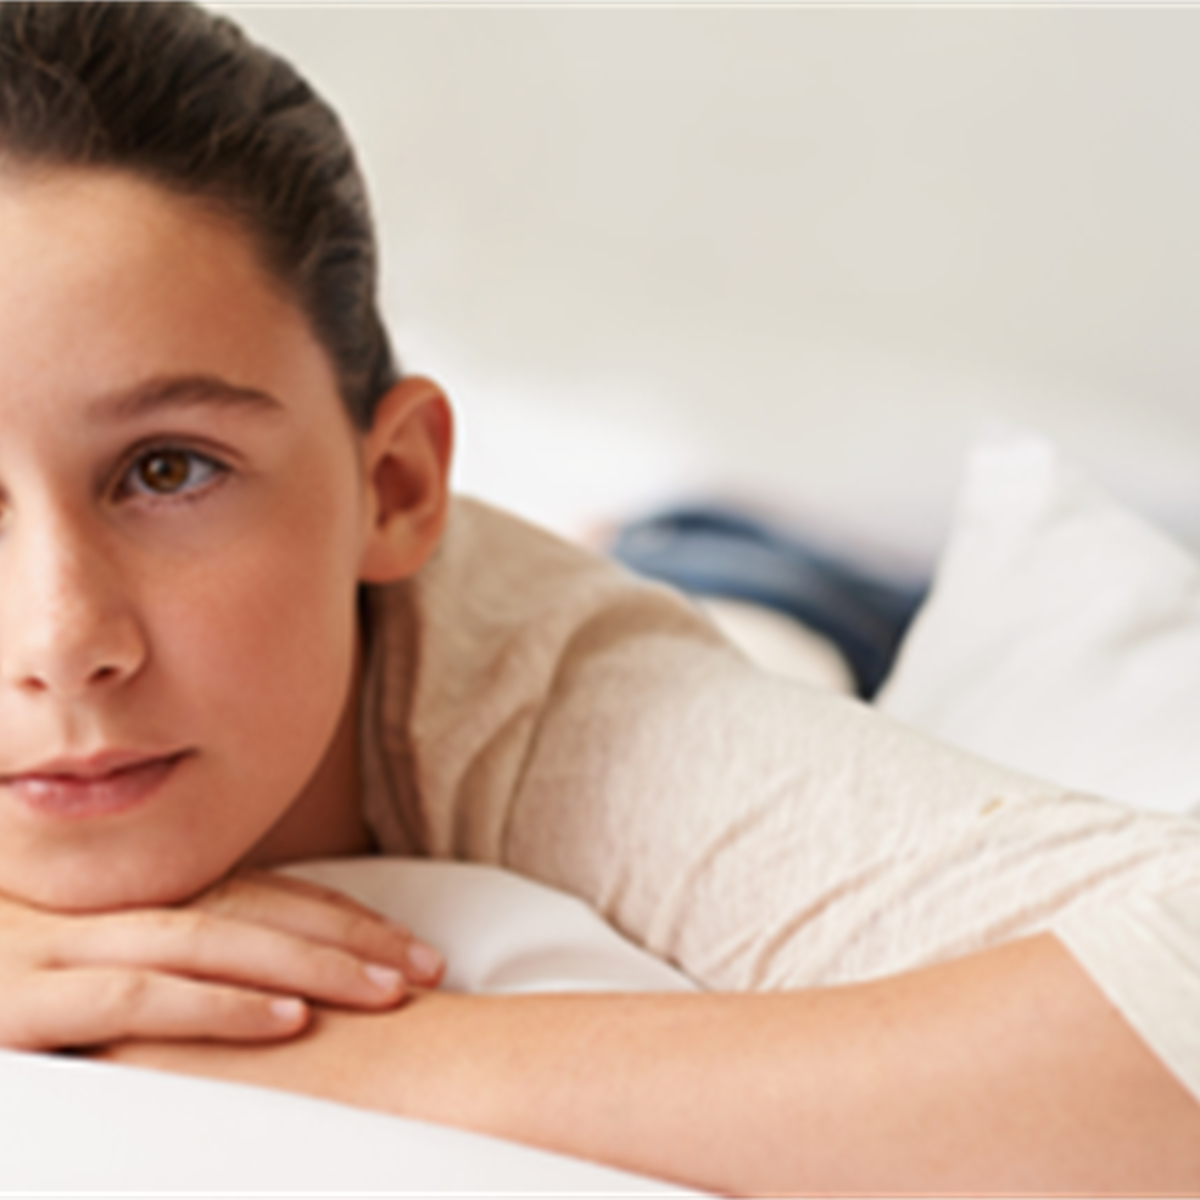 Precocious Puberty: When Puberty Starts Early 